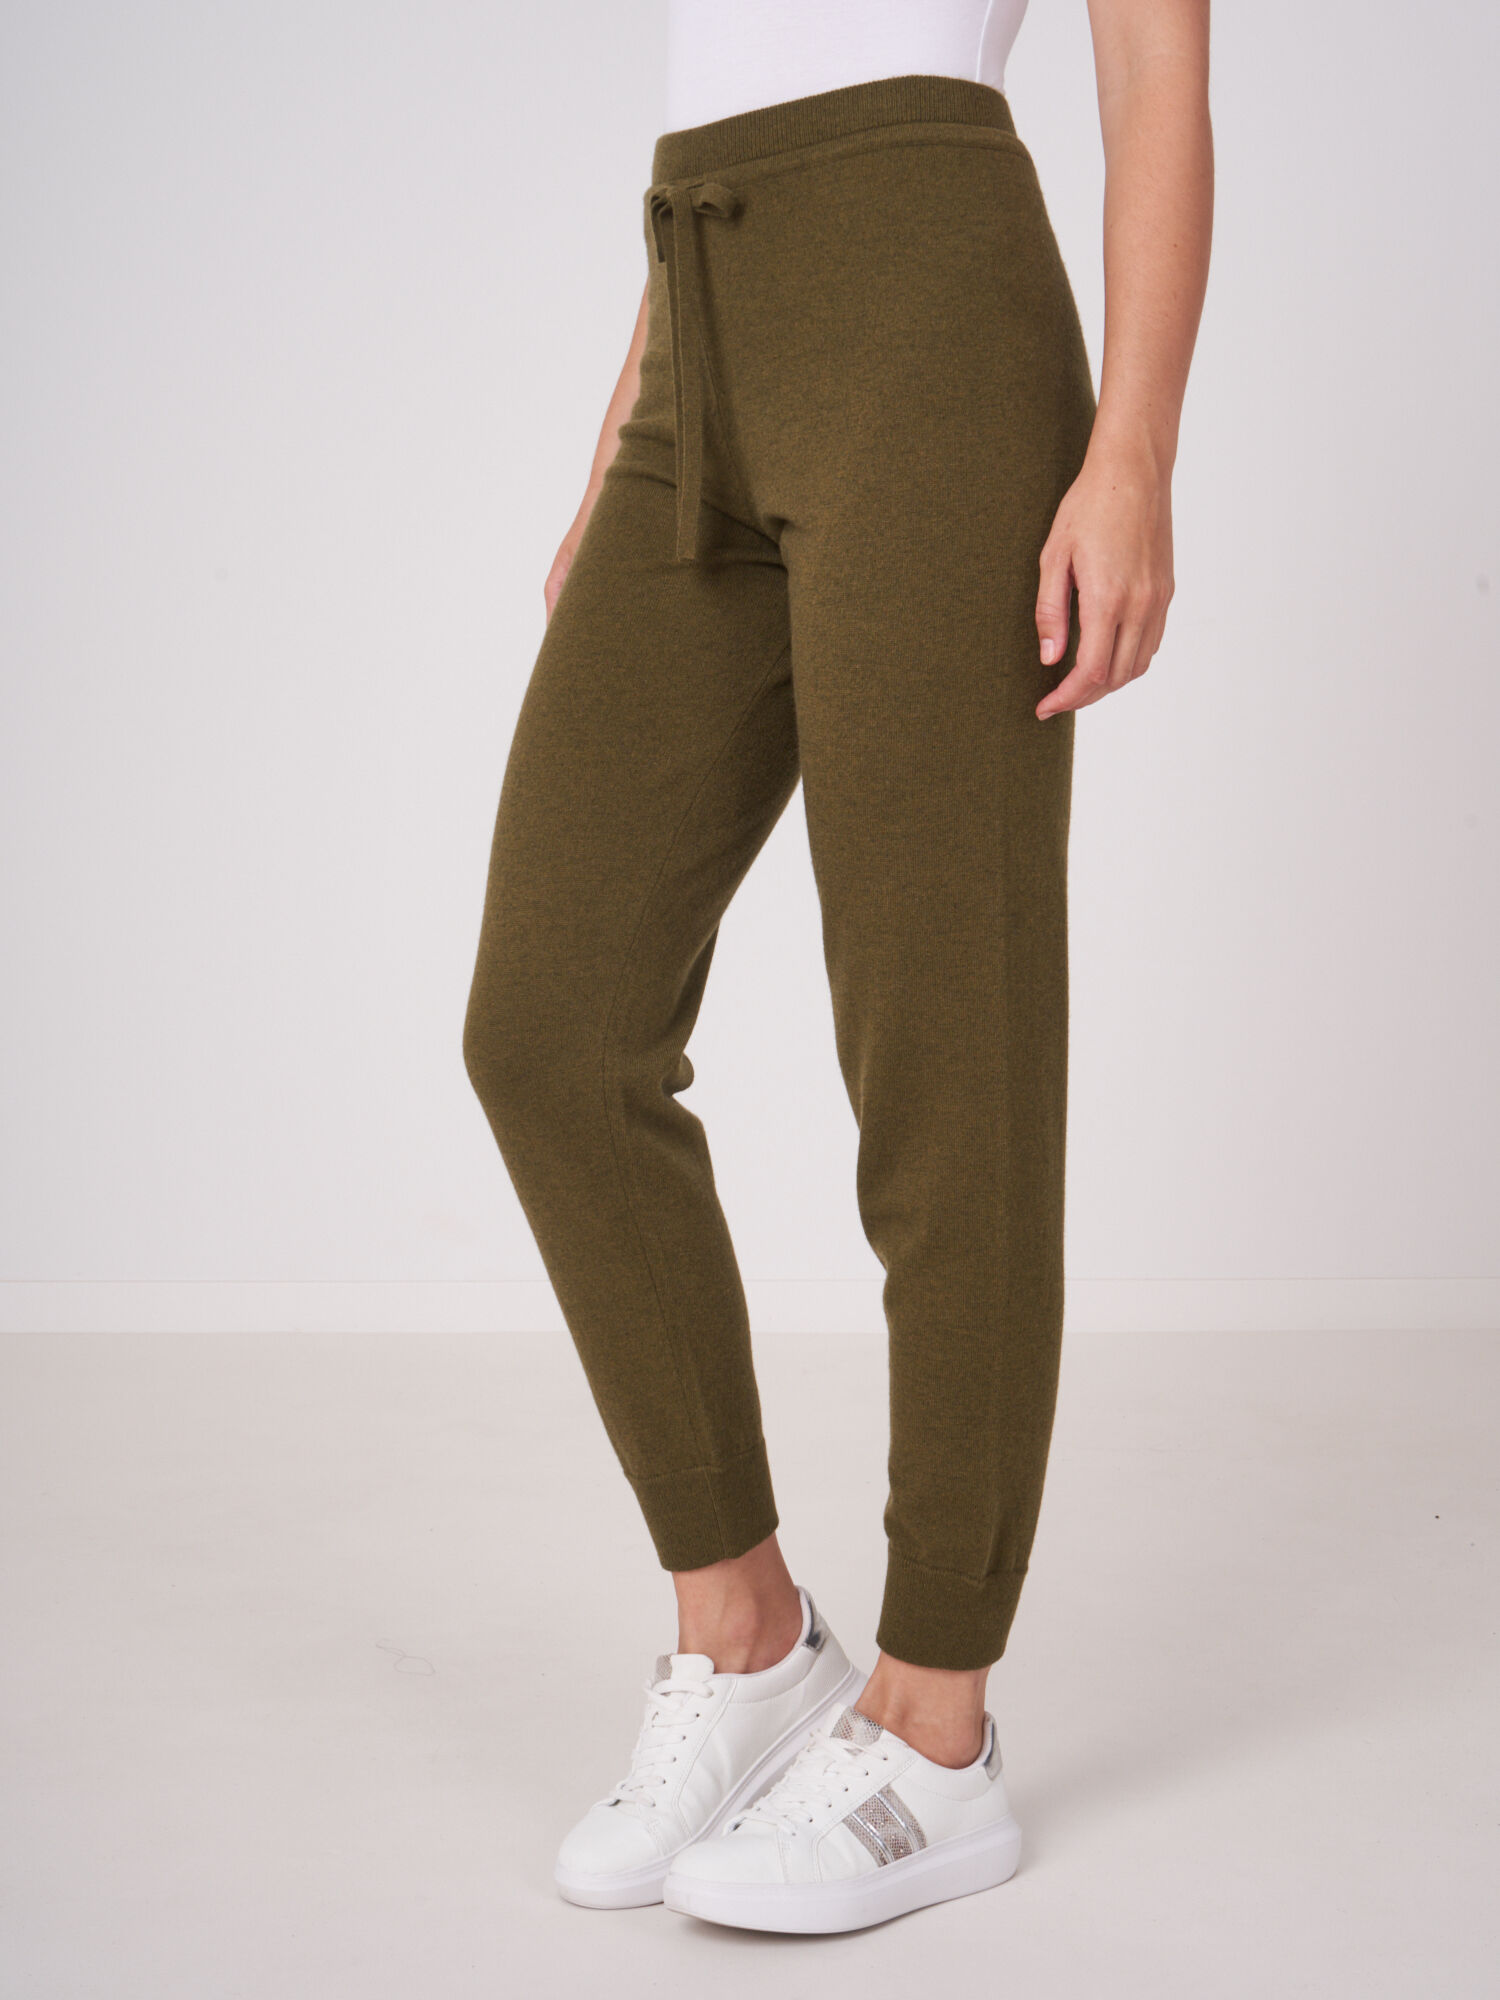 Knitted jogging cashmere blend lounge pants